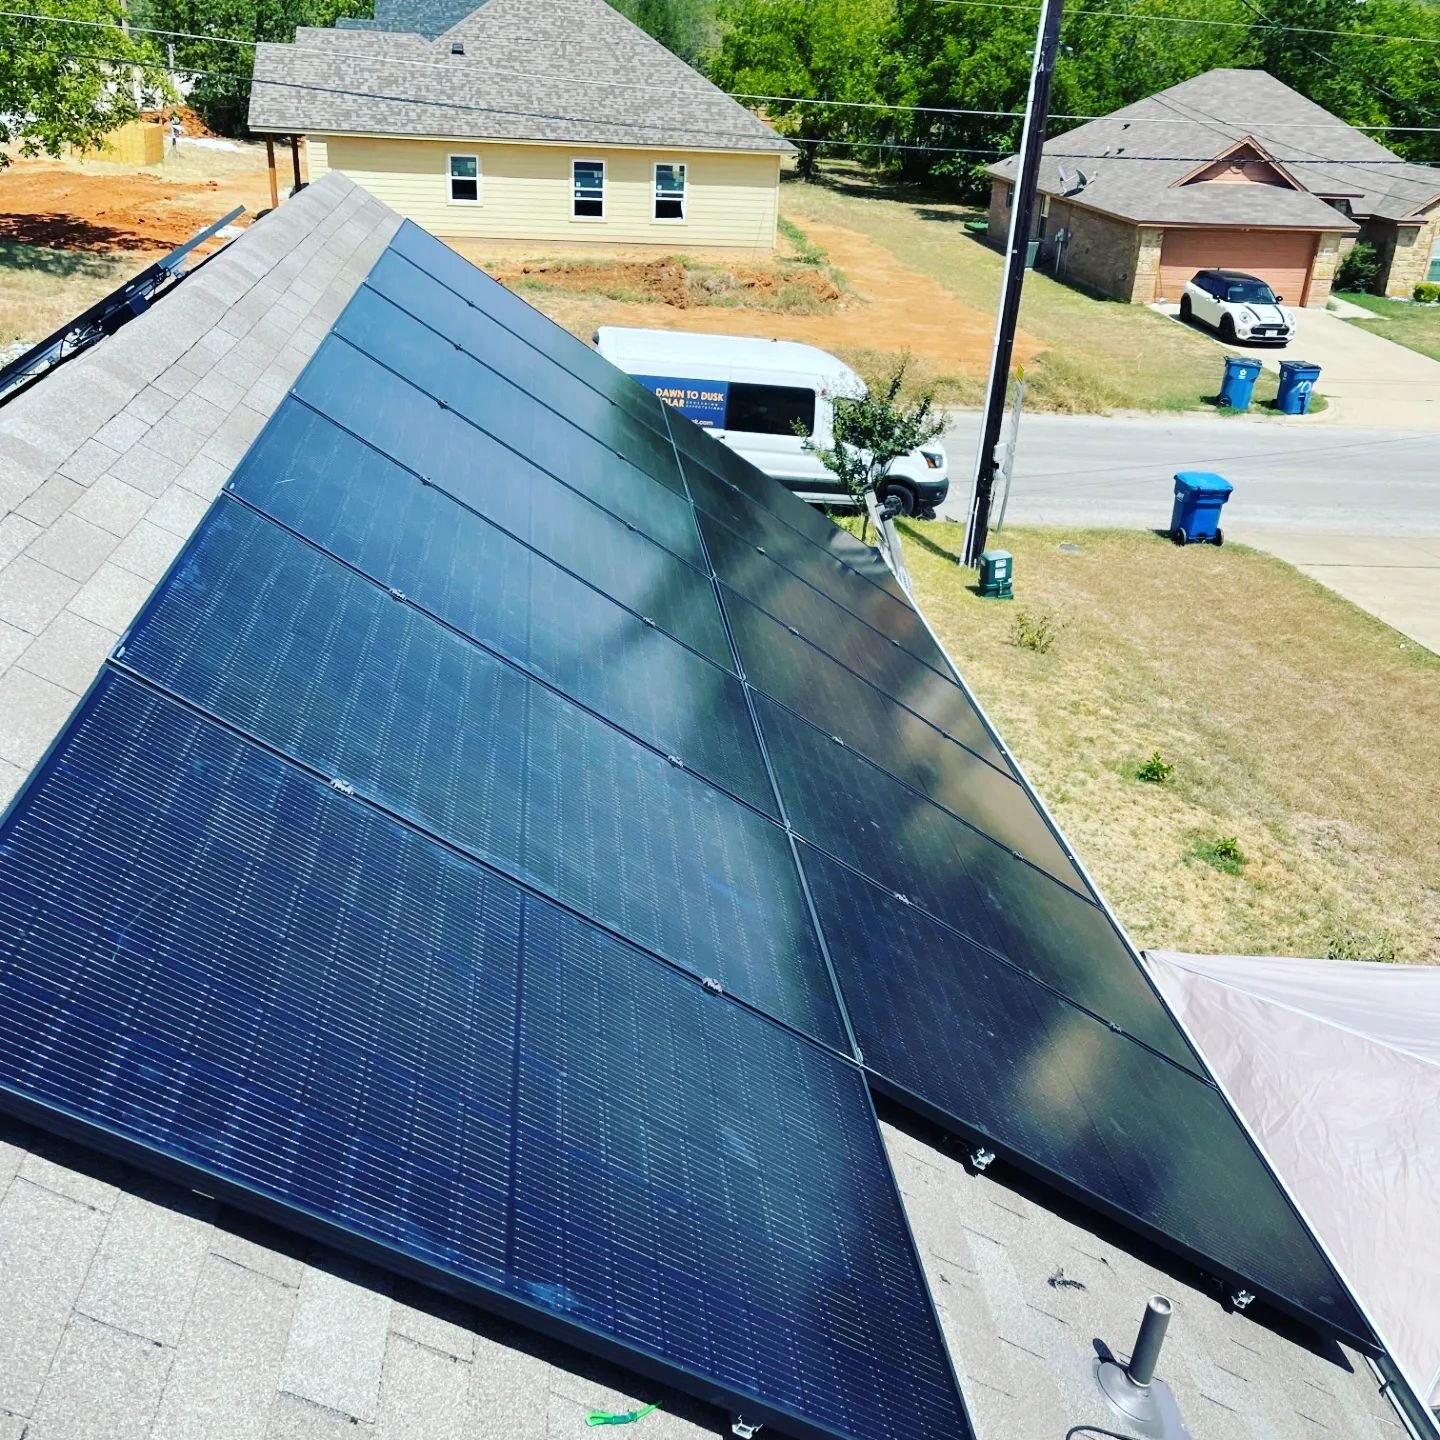 We love to start the week off with a solar installation! Record breaking heat waves in San Antonio and Houston over the weekend, and electric rates up 30-70% from last year have us incredibly busy helping homeowners take control of where they get the